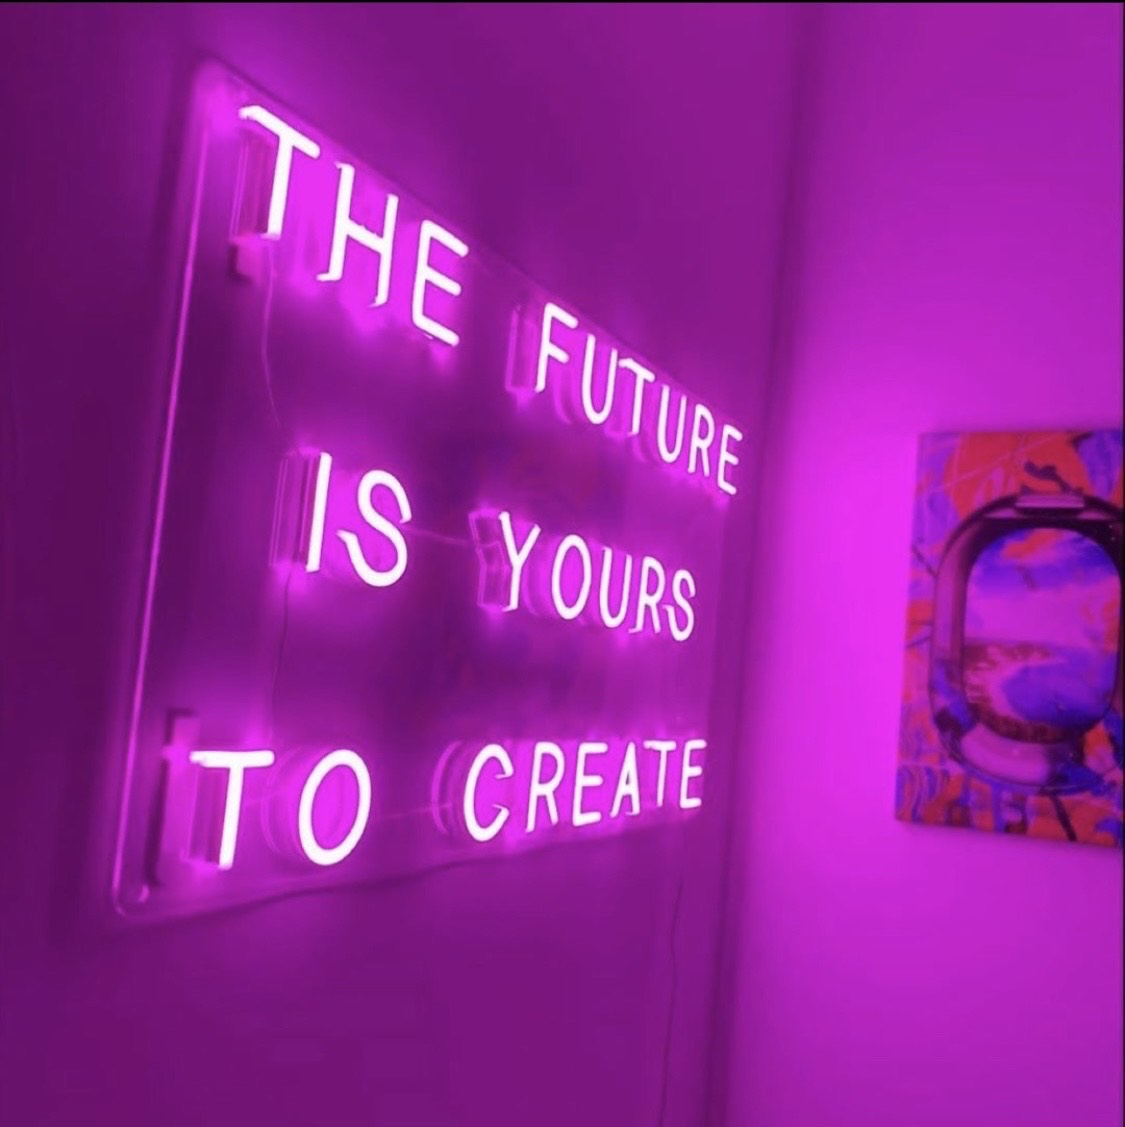 "The Future is Yours to Create" LED neon sign